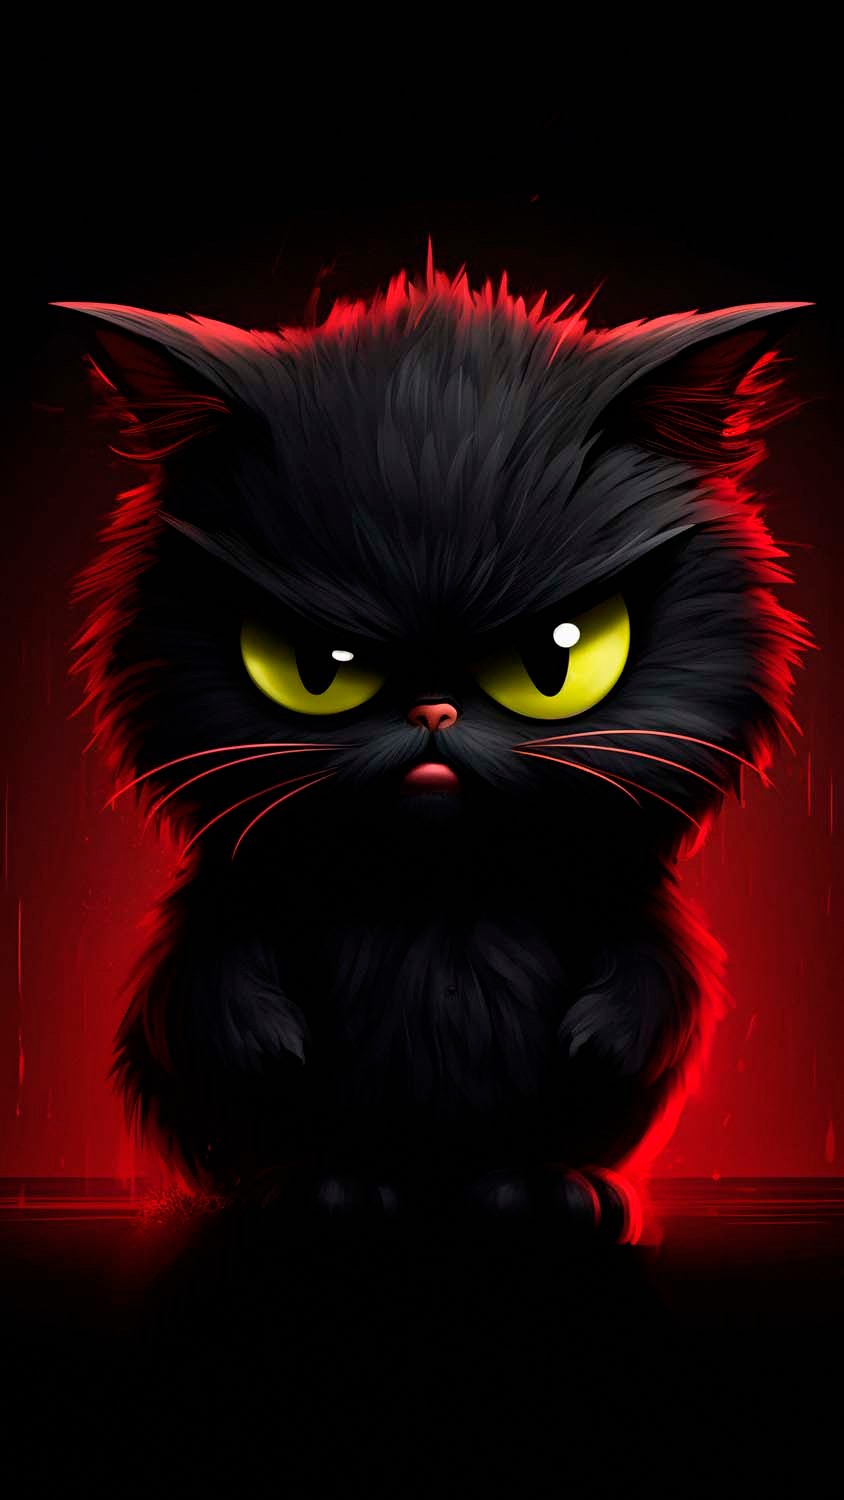 Angry Cat iPhone Wallpaper 4K  iPhone Wallpapers